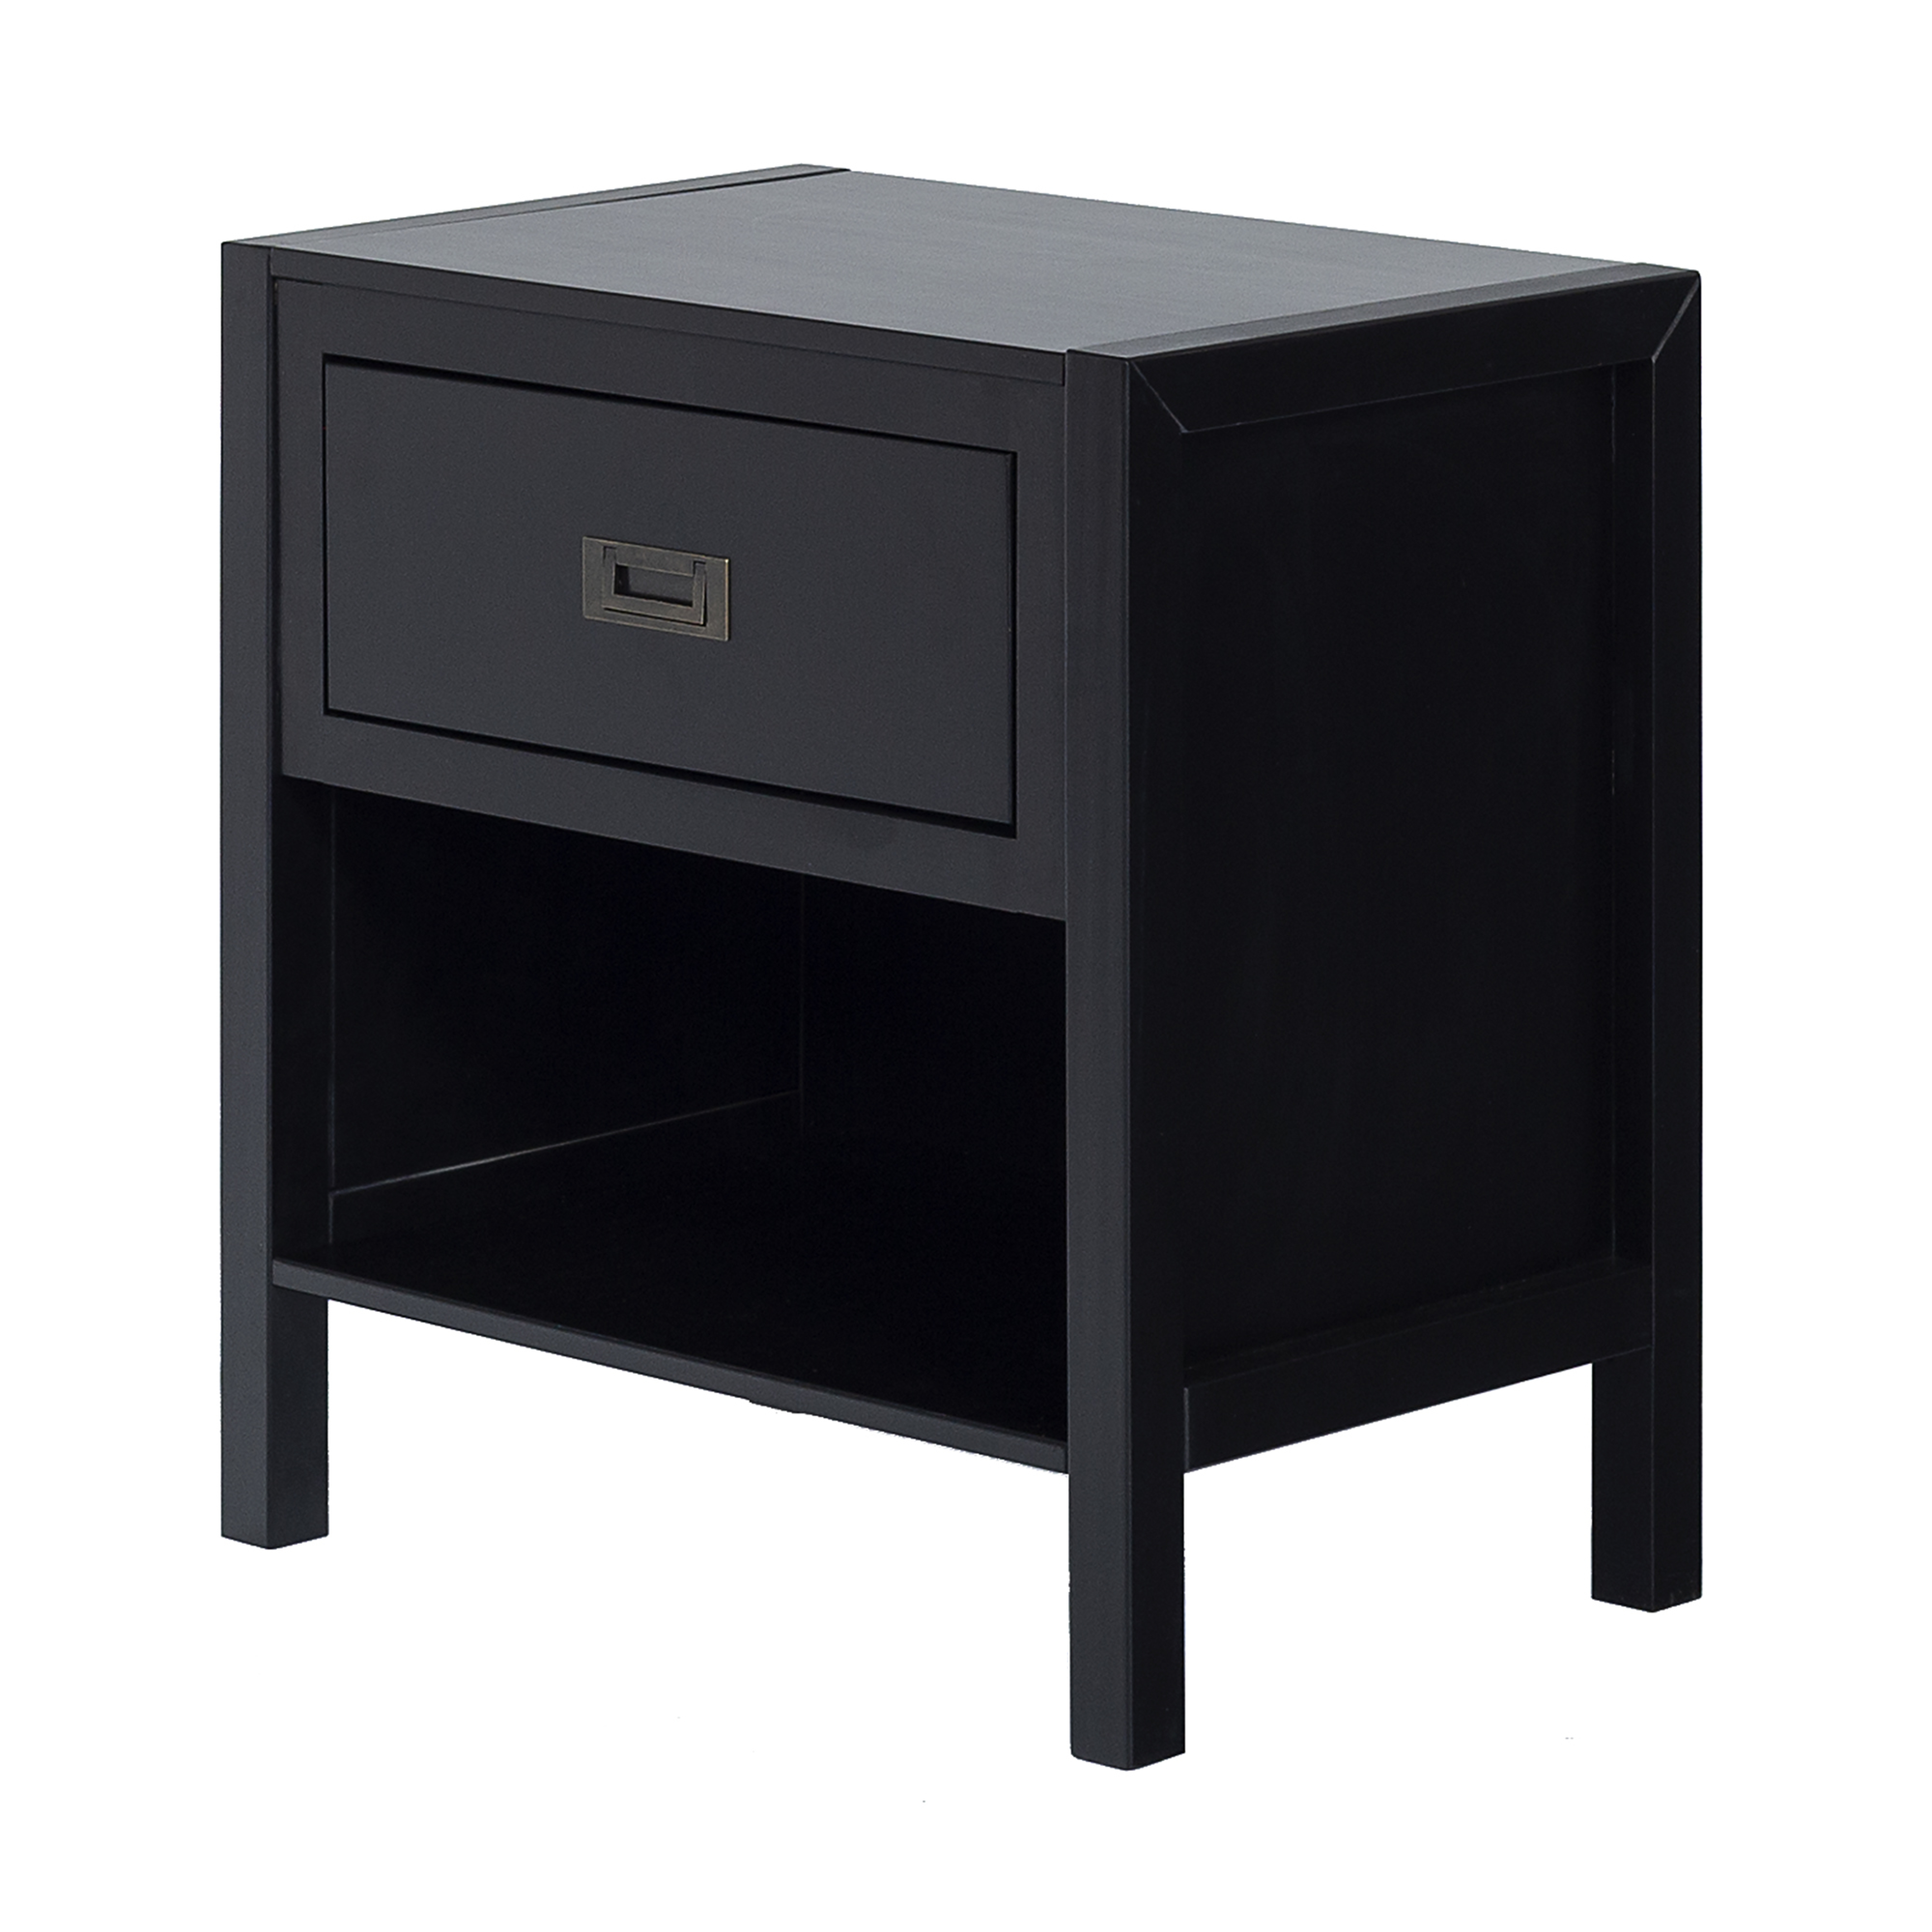 Lydia 1 Drawer Classic Solid Wood Nightstand - Black - Contour & Co.